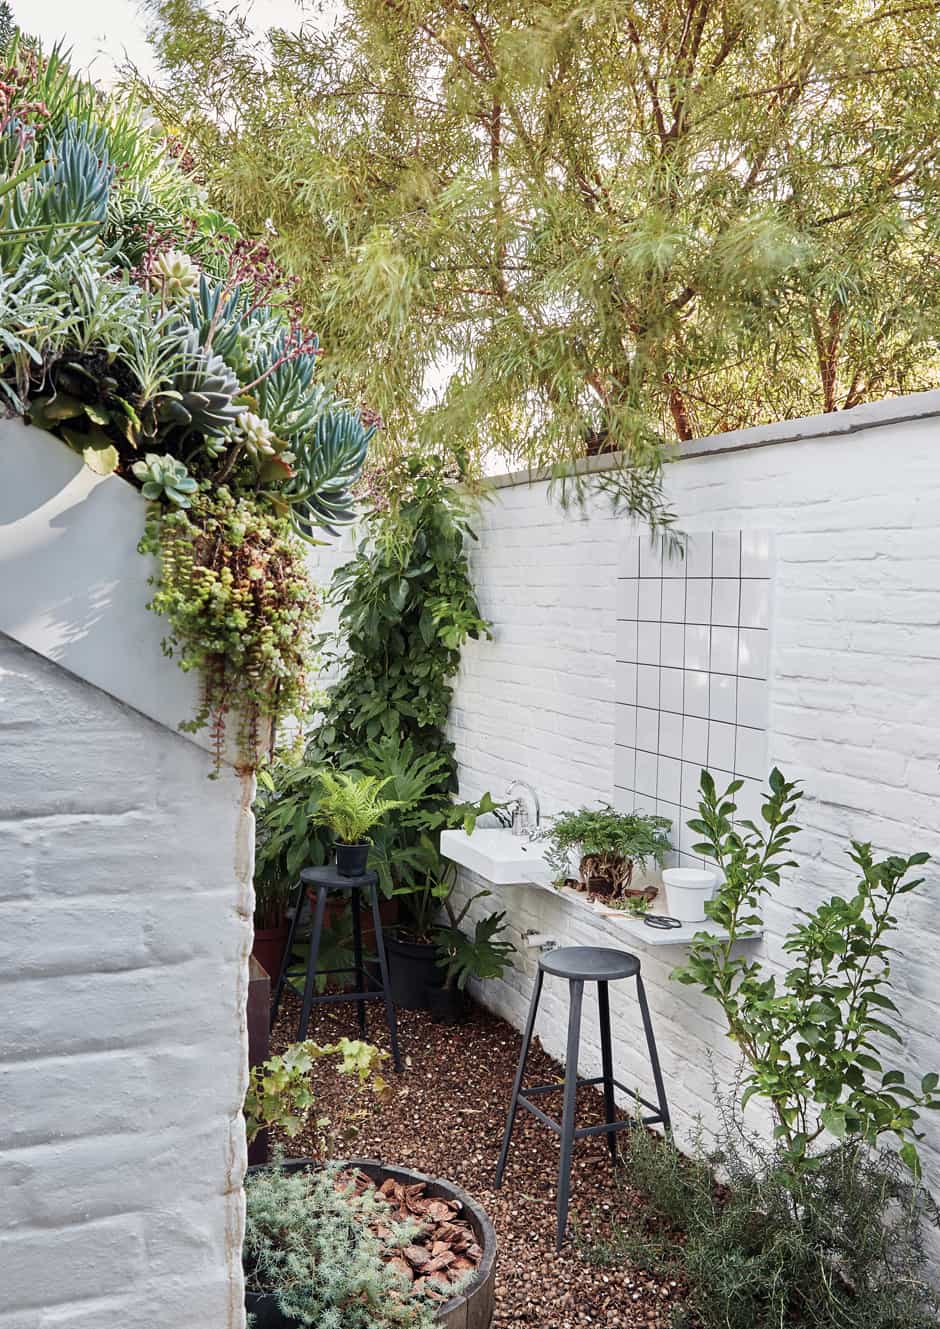 KITCHEN GARDEN Herbs thrive in this area, where a wall-mounted planter helps to maximise space. This courtyard also features a pizza oven and a roof garden overflowing with succulents.